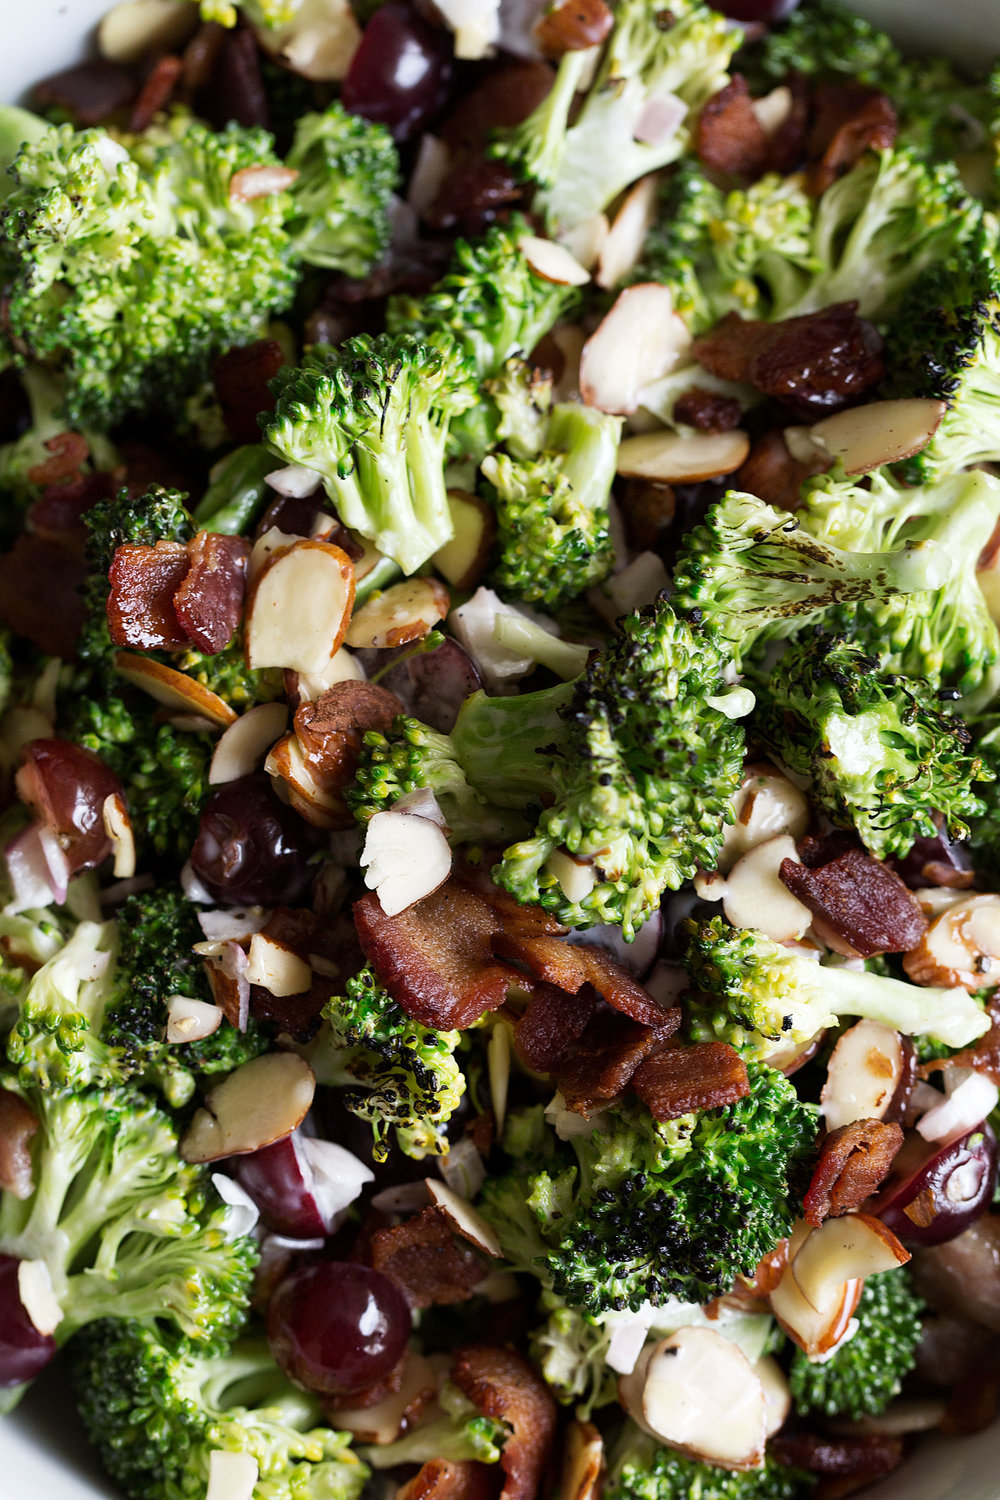 broccoli salad with grapes, bacon and almonds in mayo sauce